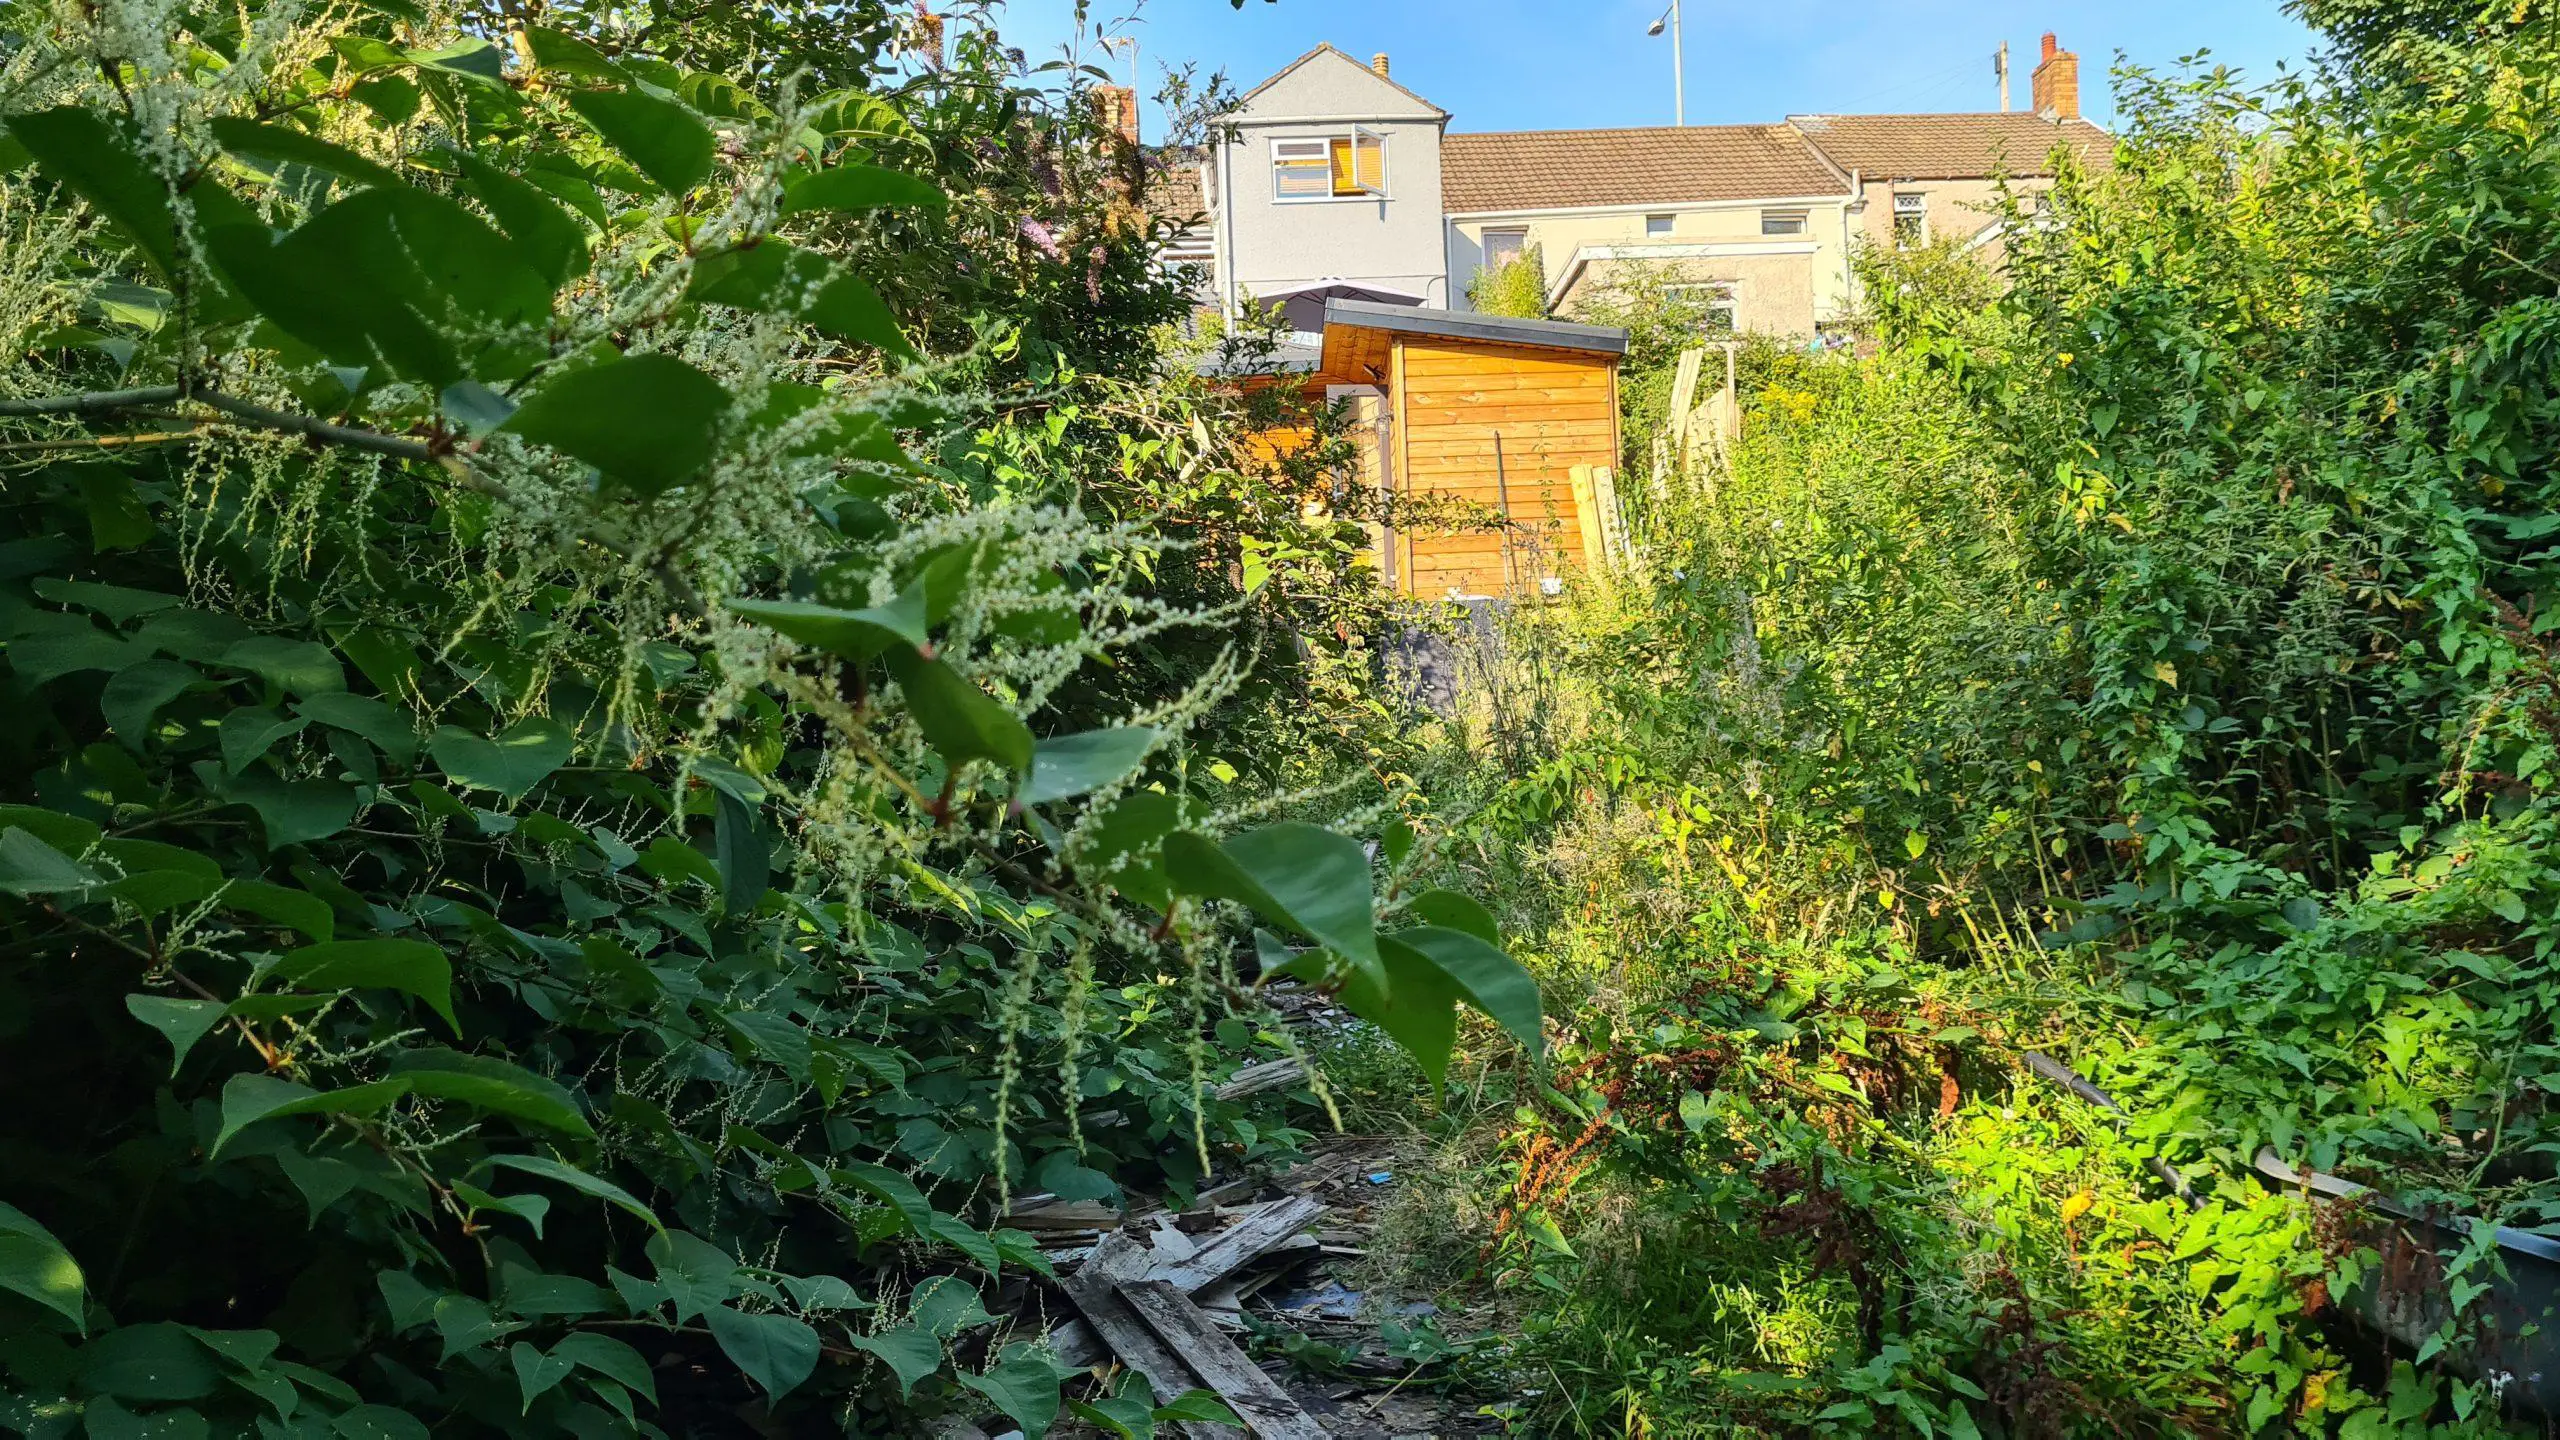 Invasive weeds growing both sides of a garden and slowly closing down any free space until there is none and no way to gain access either